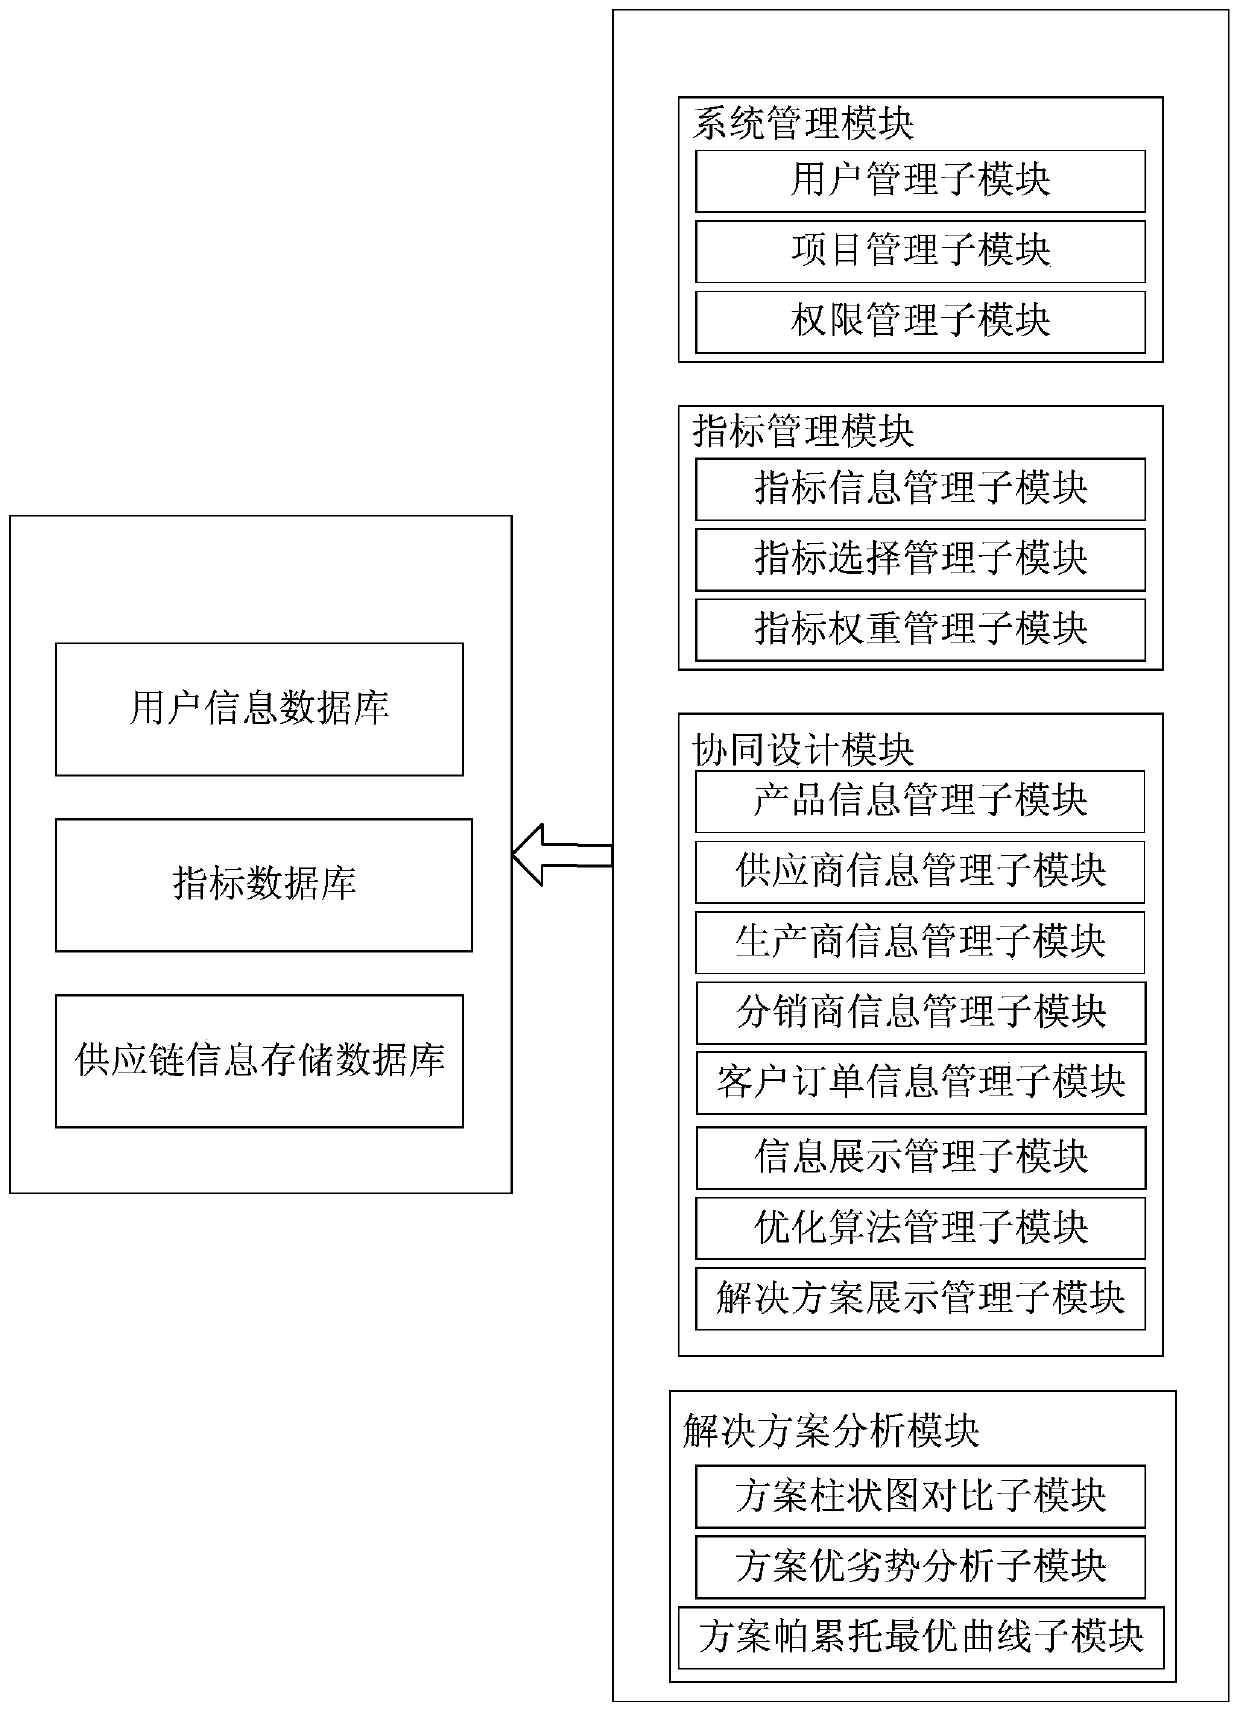 A green supply chain collaborative design and optimization system and method